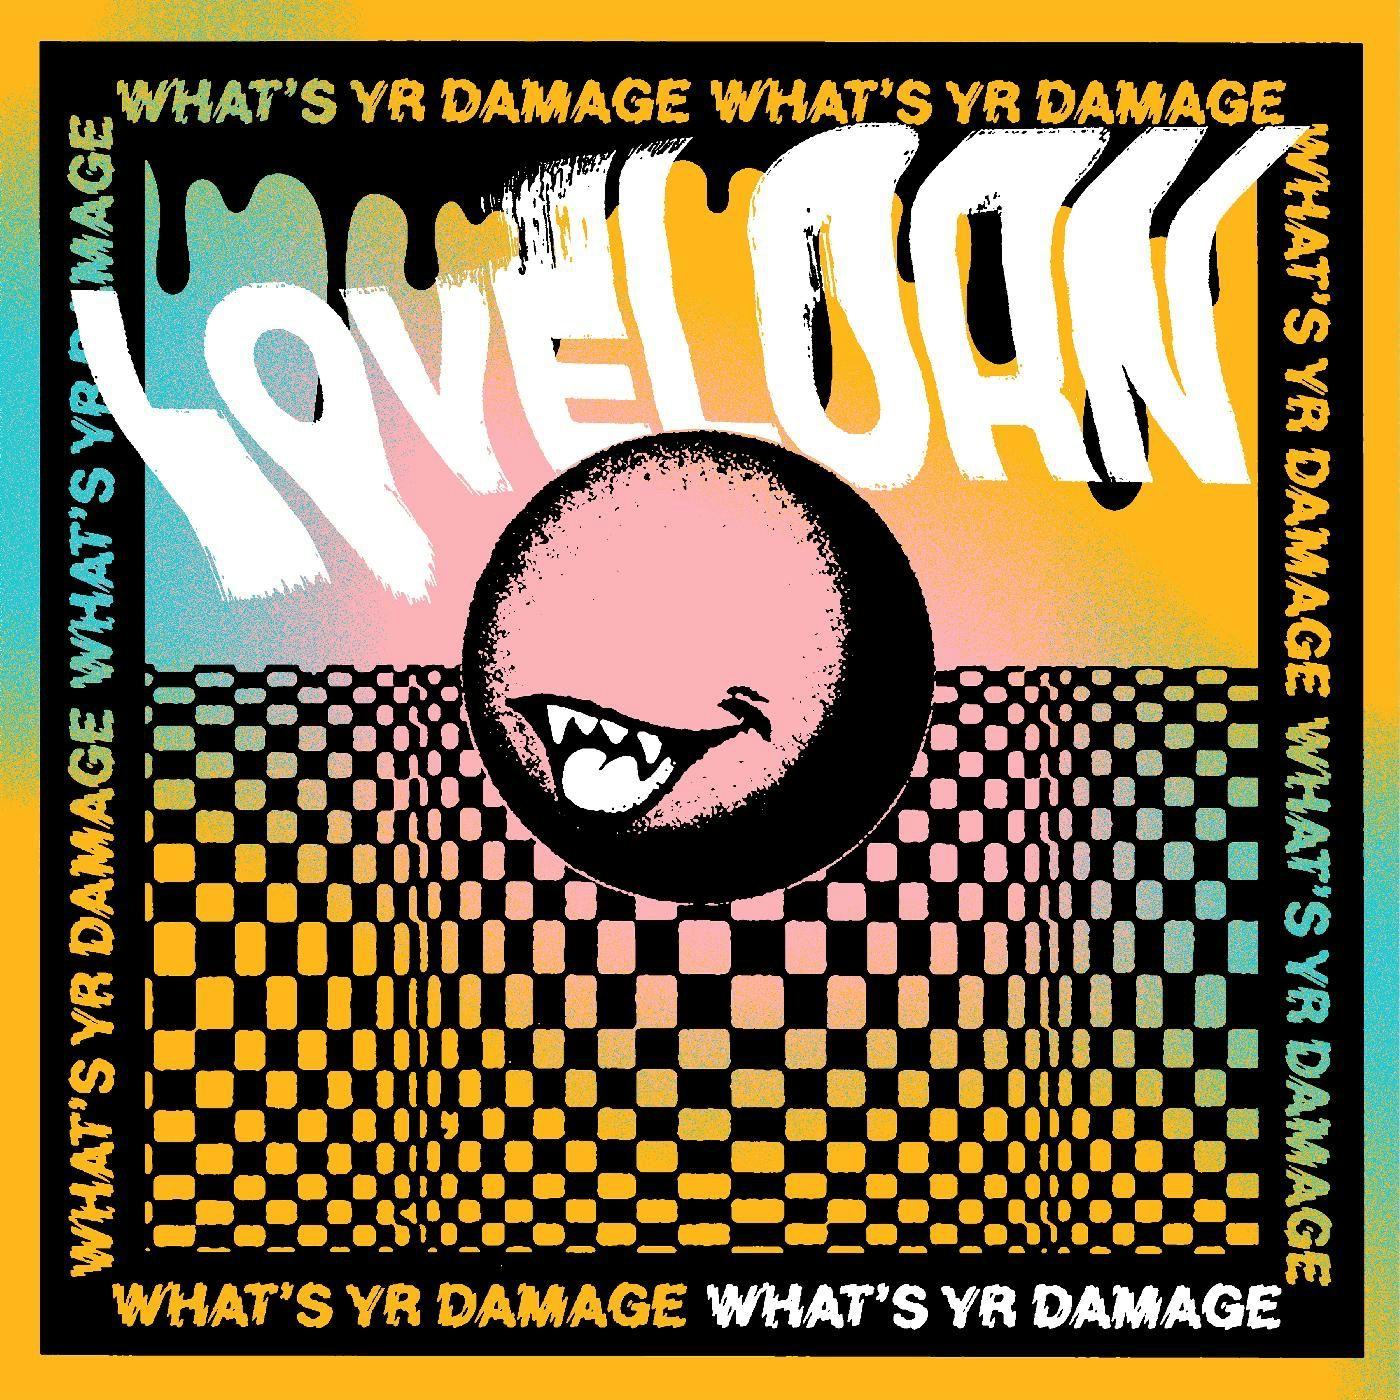 Album artwork for What's Yr Damage by Lovelorn